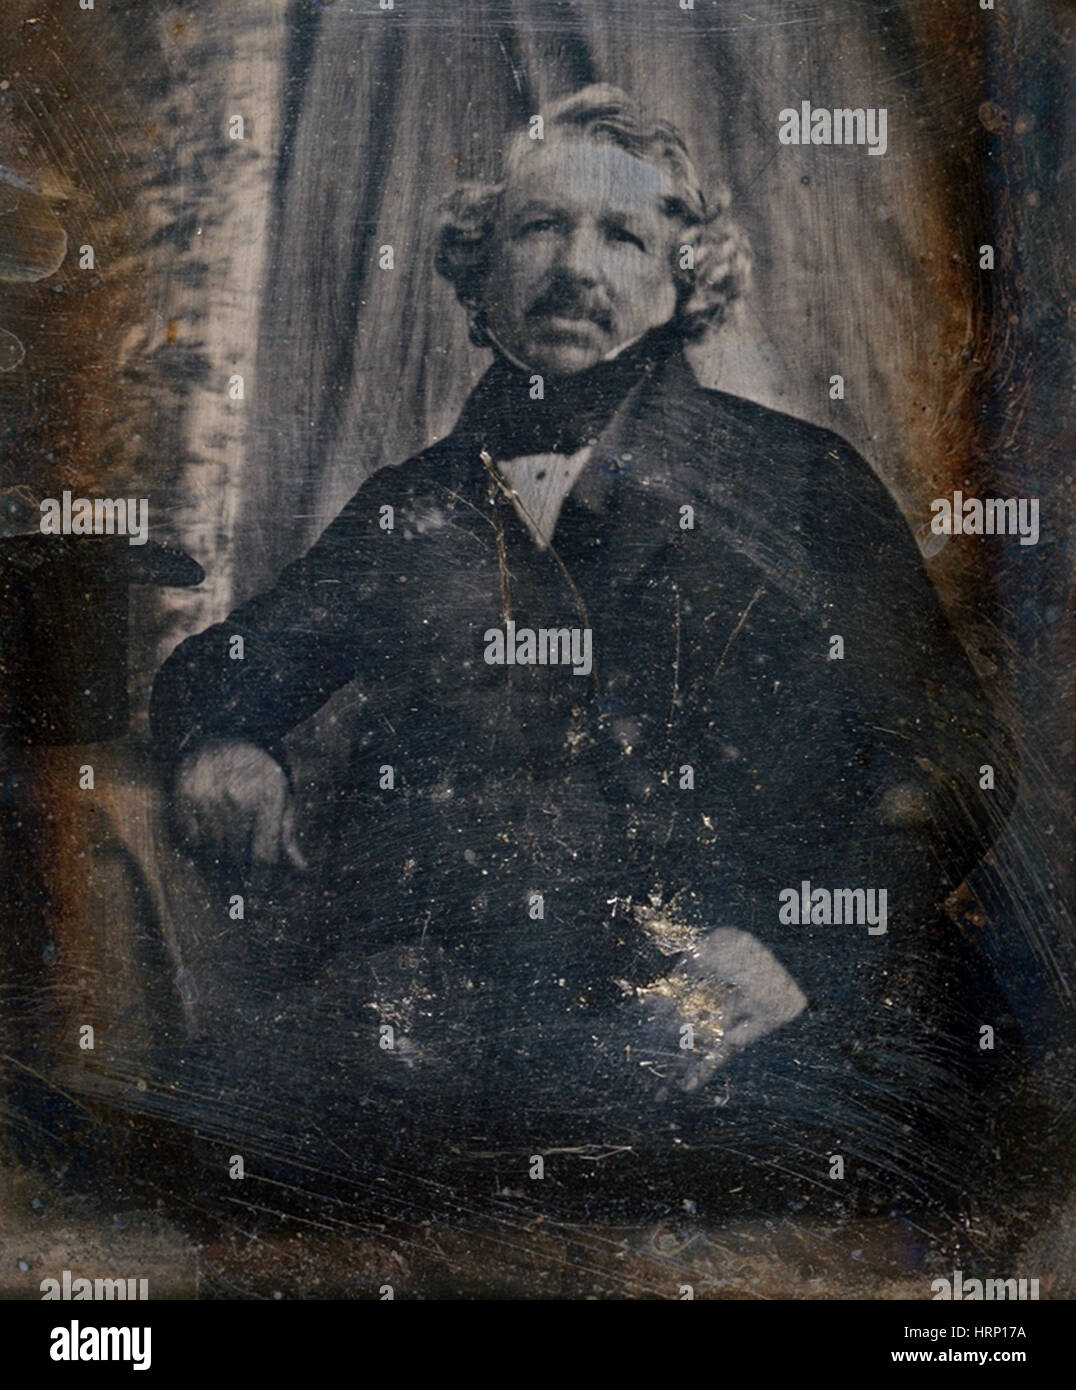 Louis Daguerre, French Inventor Stock Photo, Royalty Free Image: 135093598 - Alamy